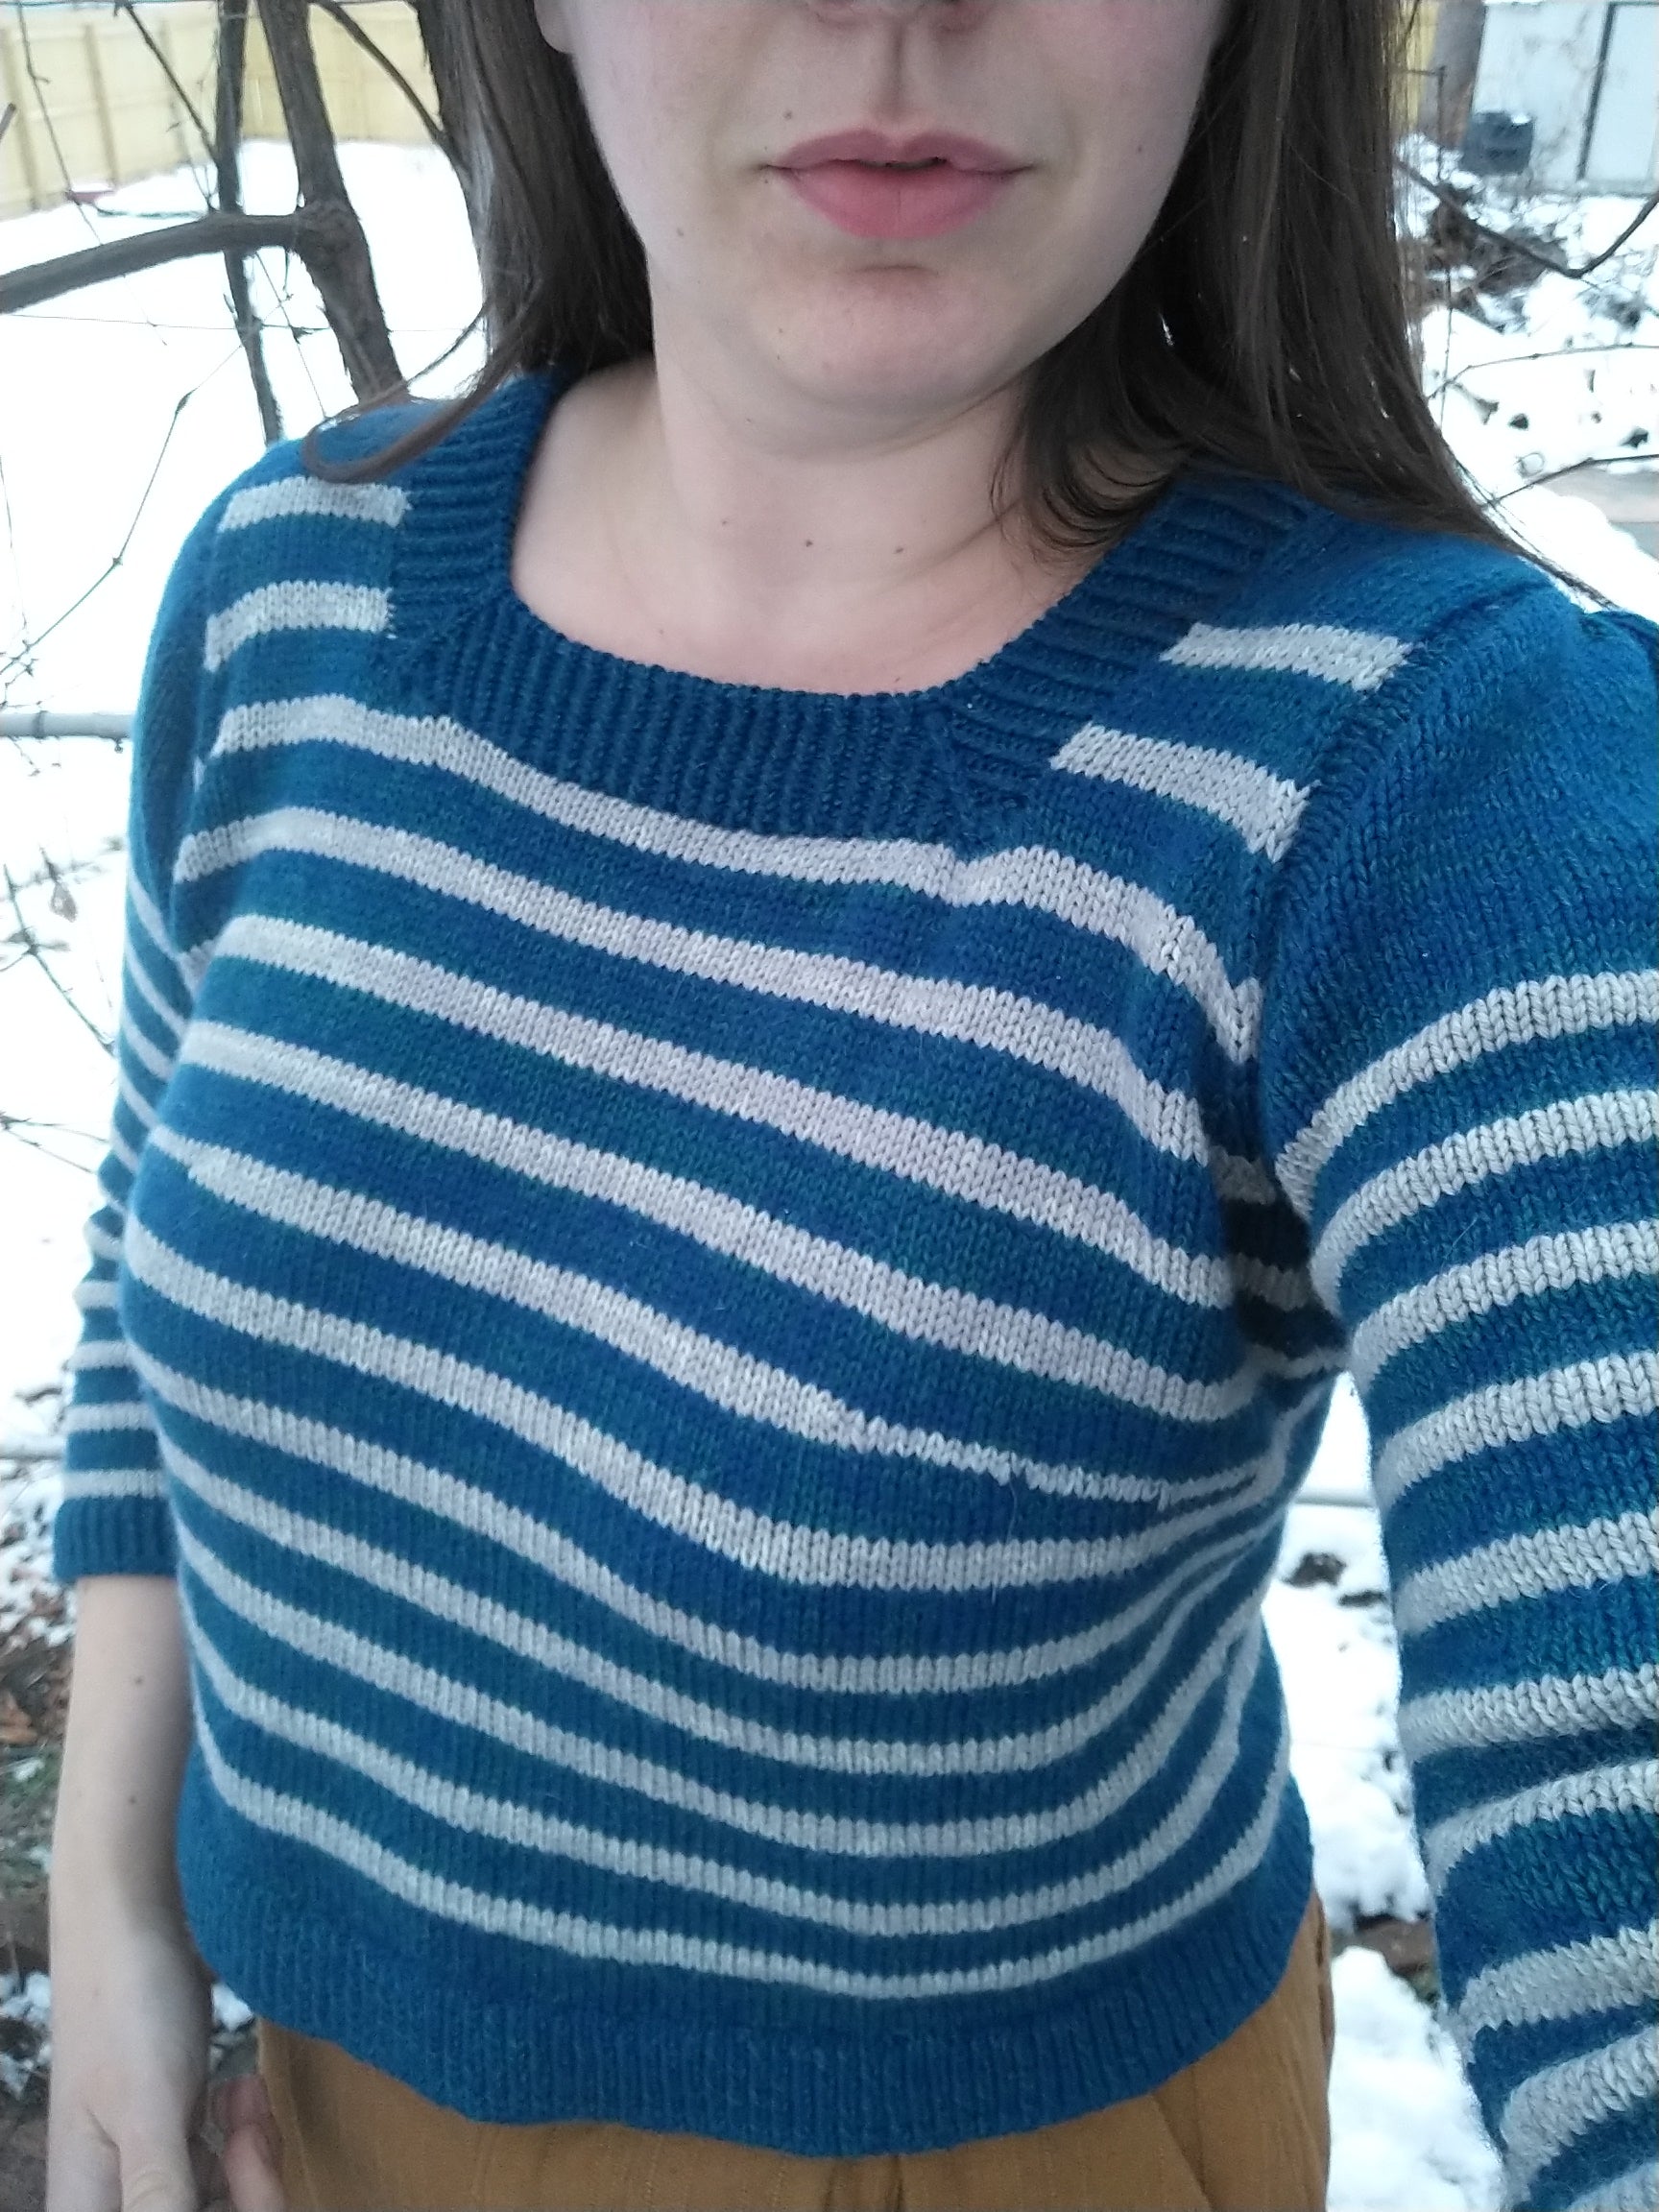 A person, seen from the neck down, wears a hand knit, blue and white striped sweater. The neckline is square and the sleeves are gathered at the top.